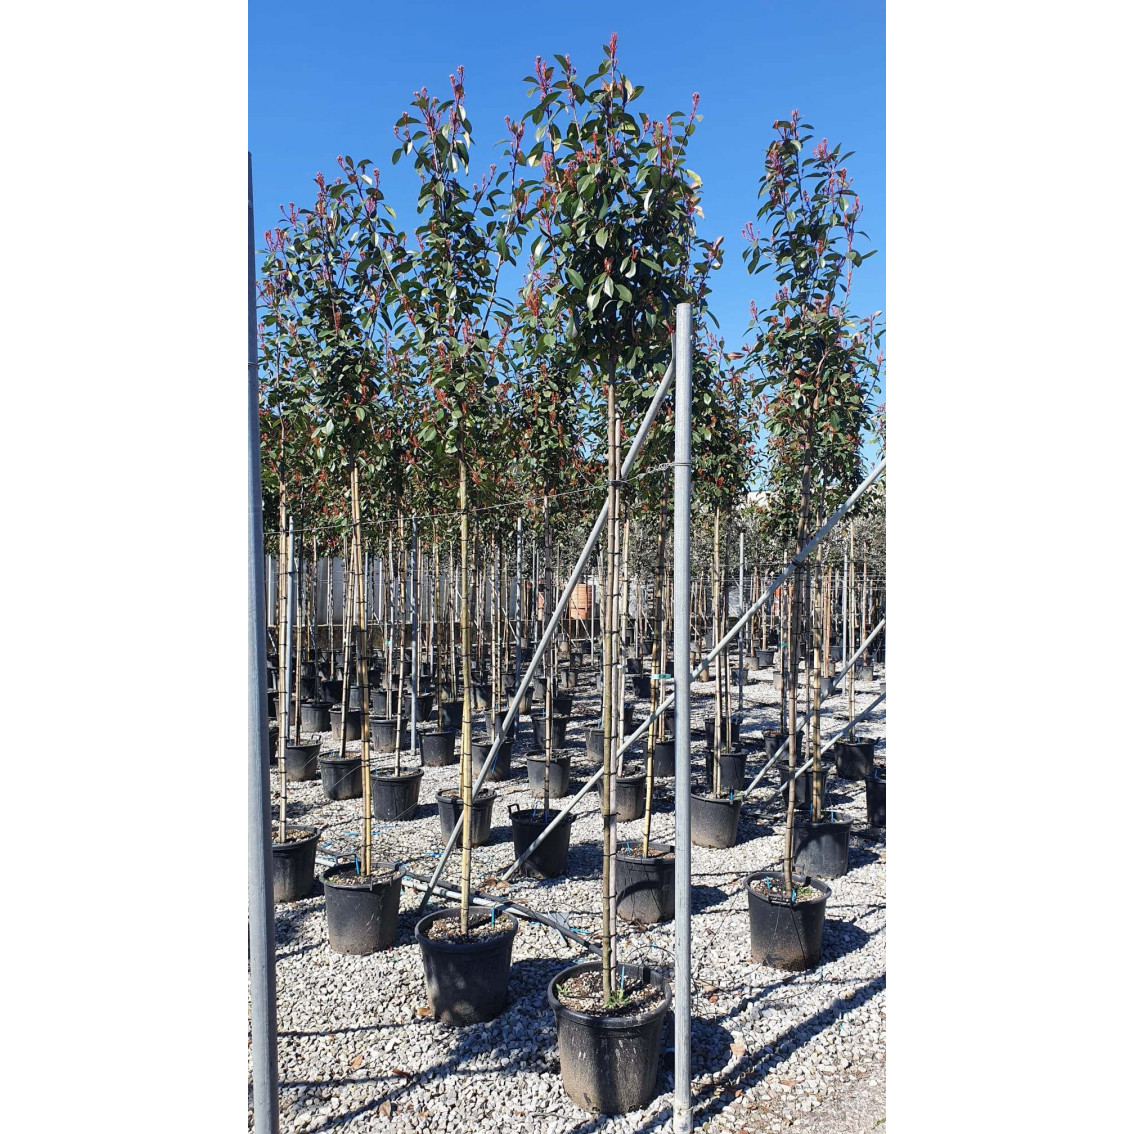 Photinia red robin 6/8cm girth, Approximately 10-11ft including pot height